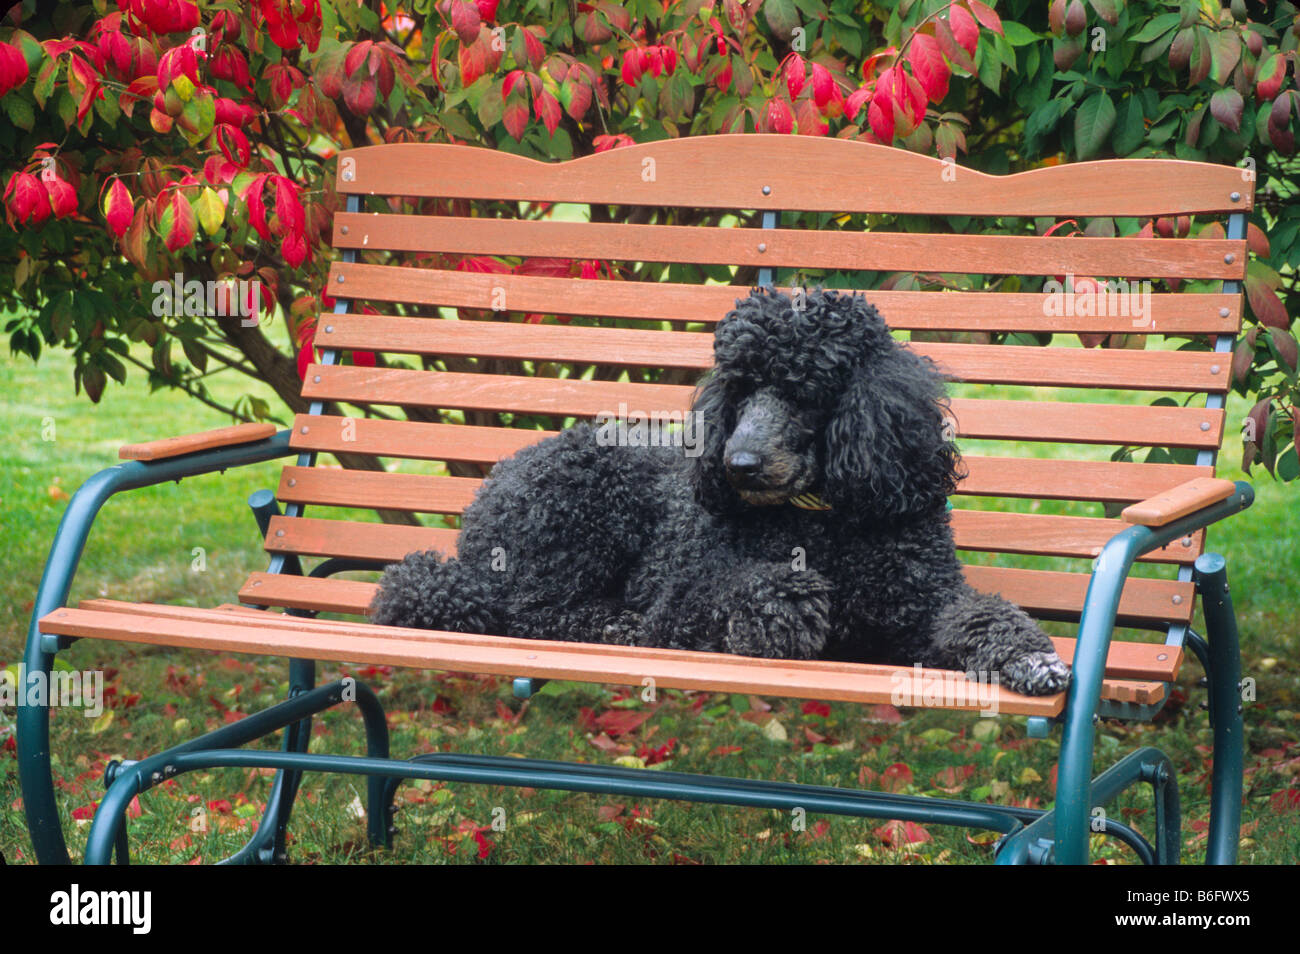 Standard poodle resting on the garden bench, stained bench garden backyard burning bush Euonymus alatus calm peaceful restful Stock Photo